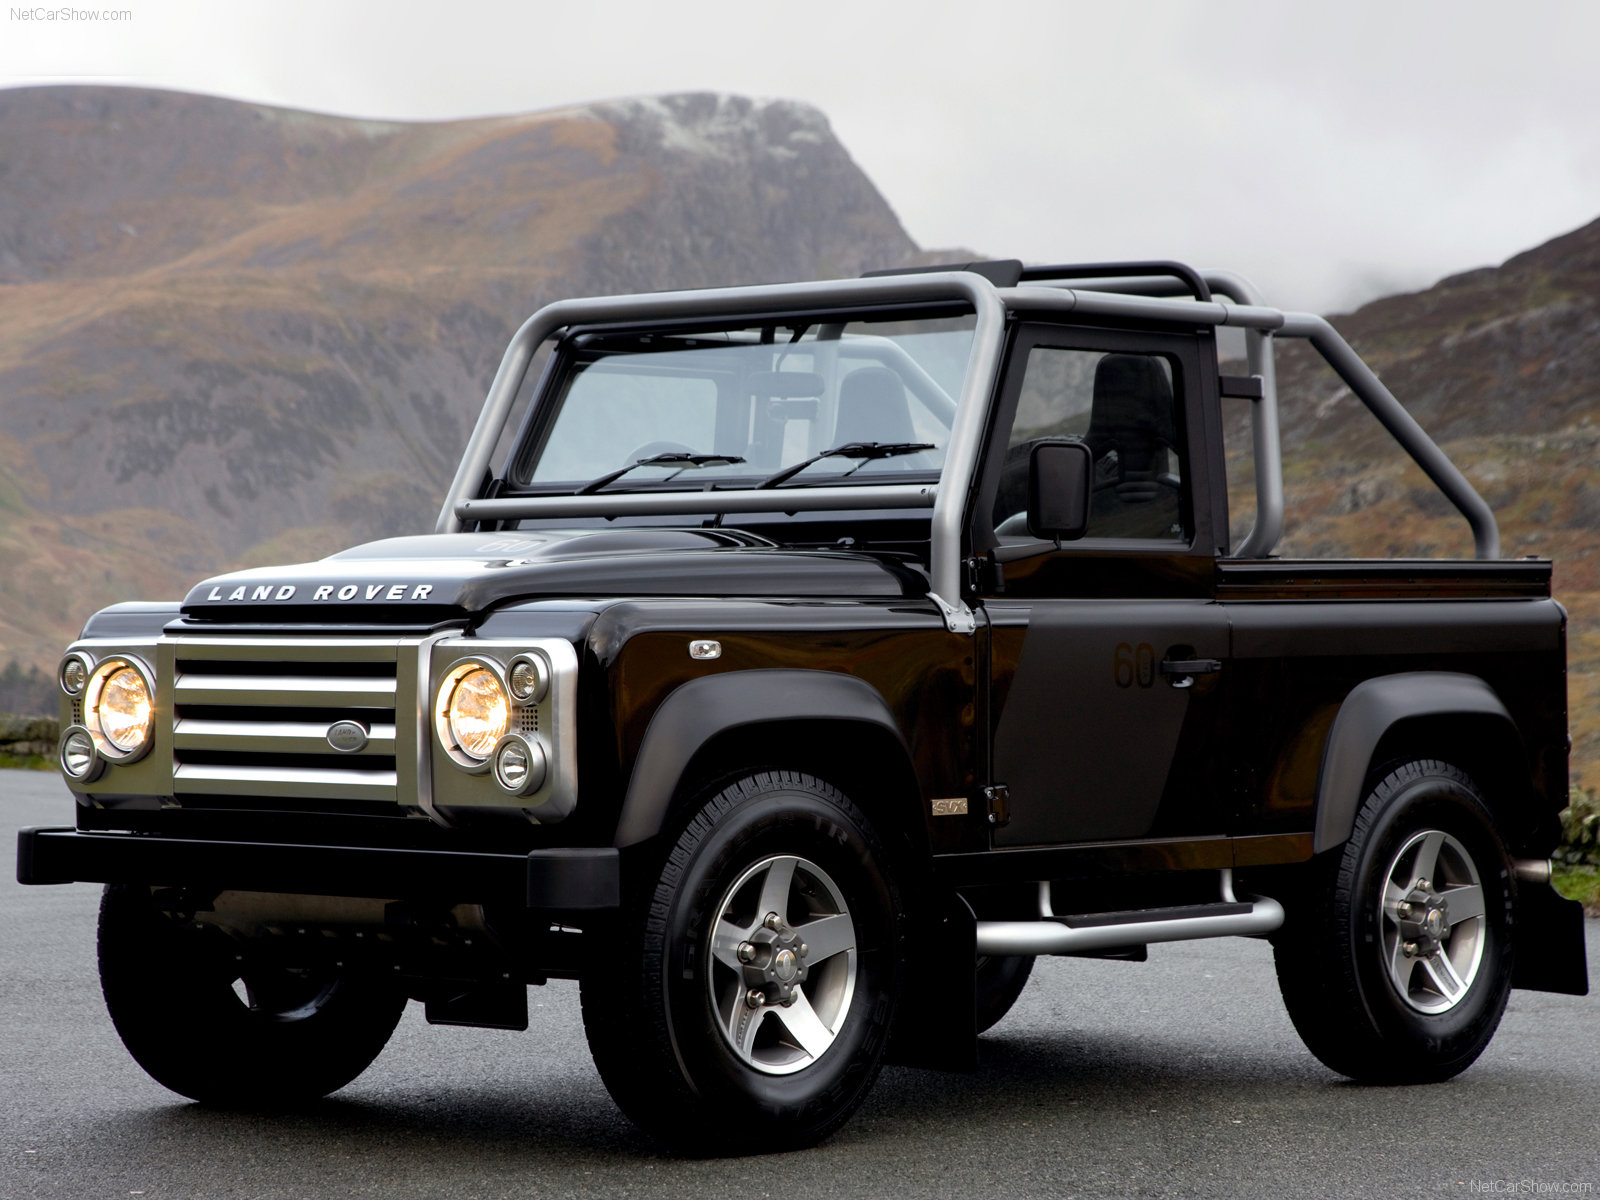 Download High quality front side black jeep Land Rover wallpaper / 1600x1200